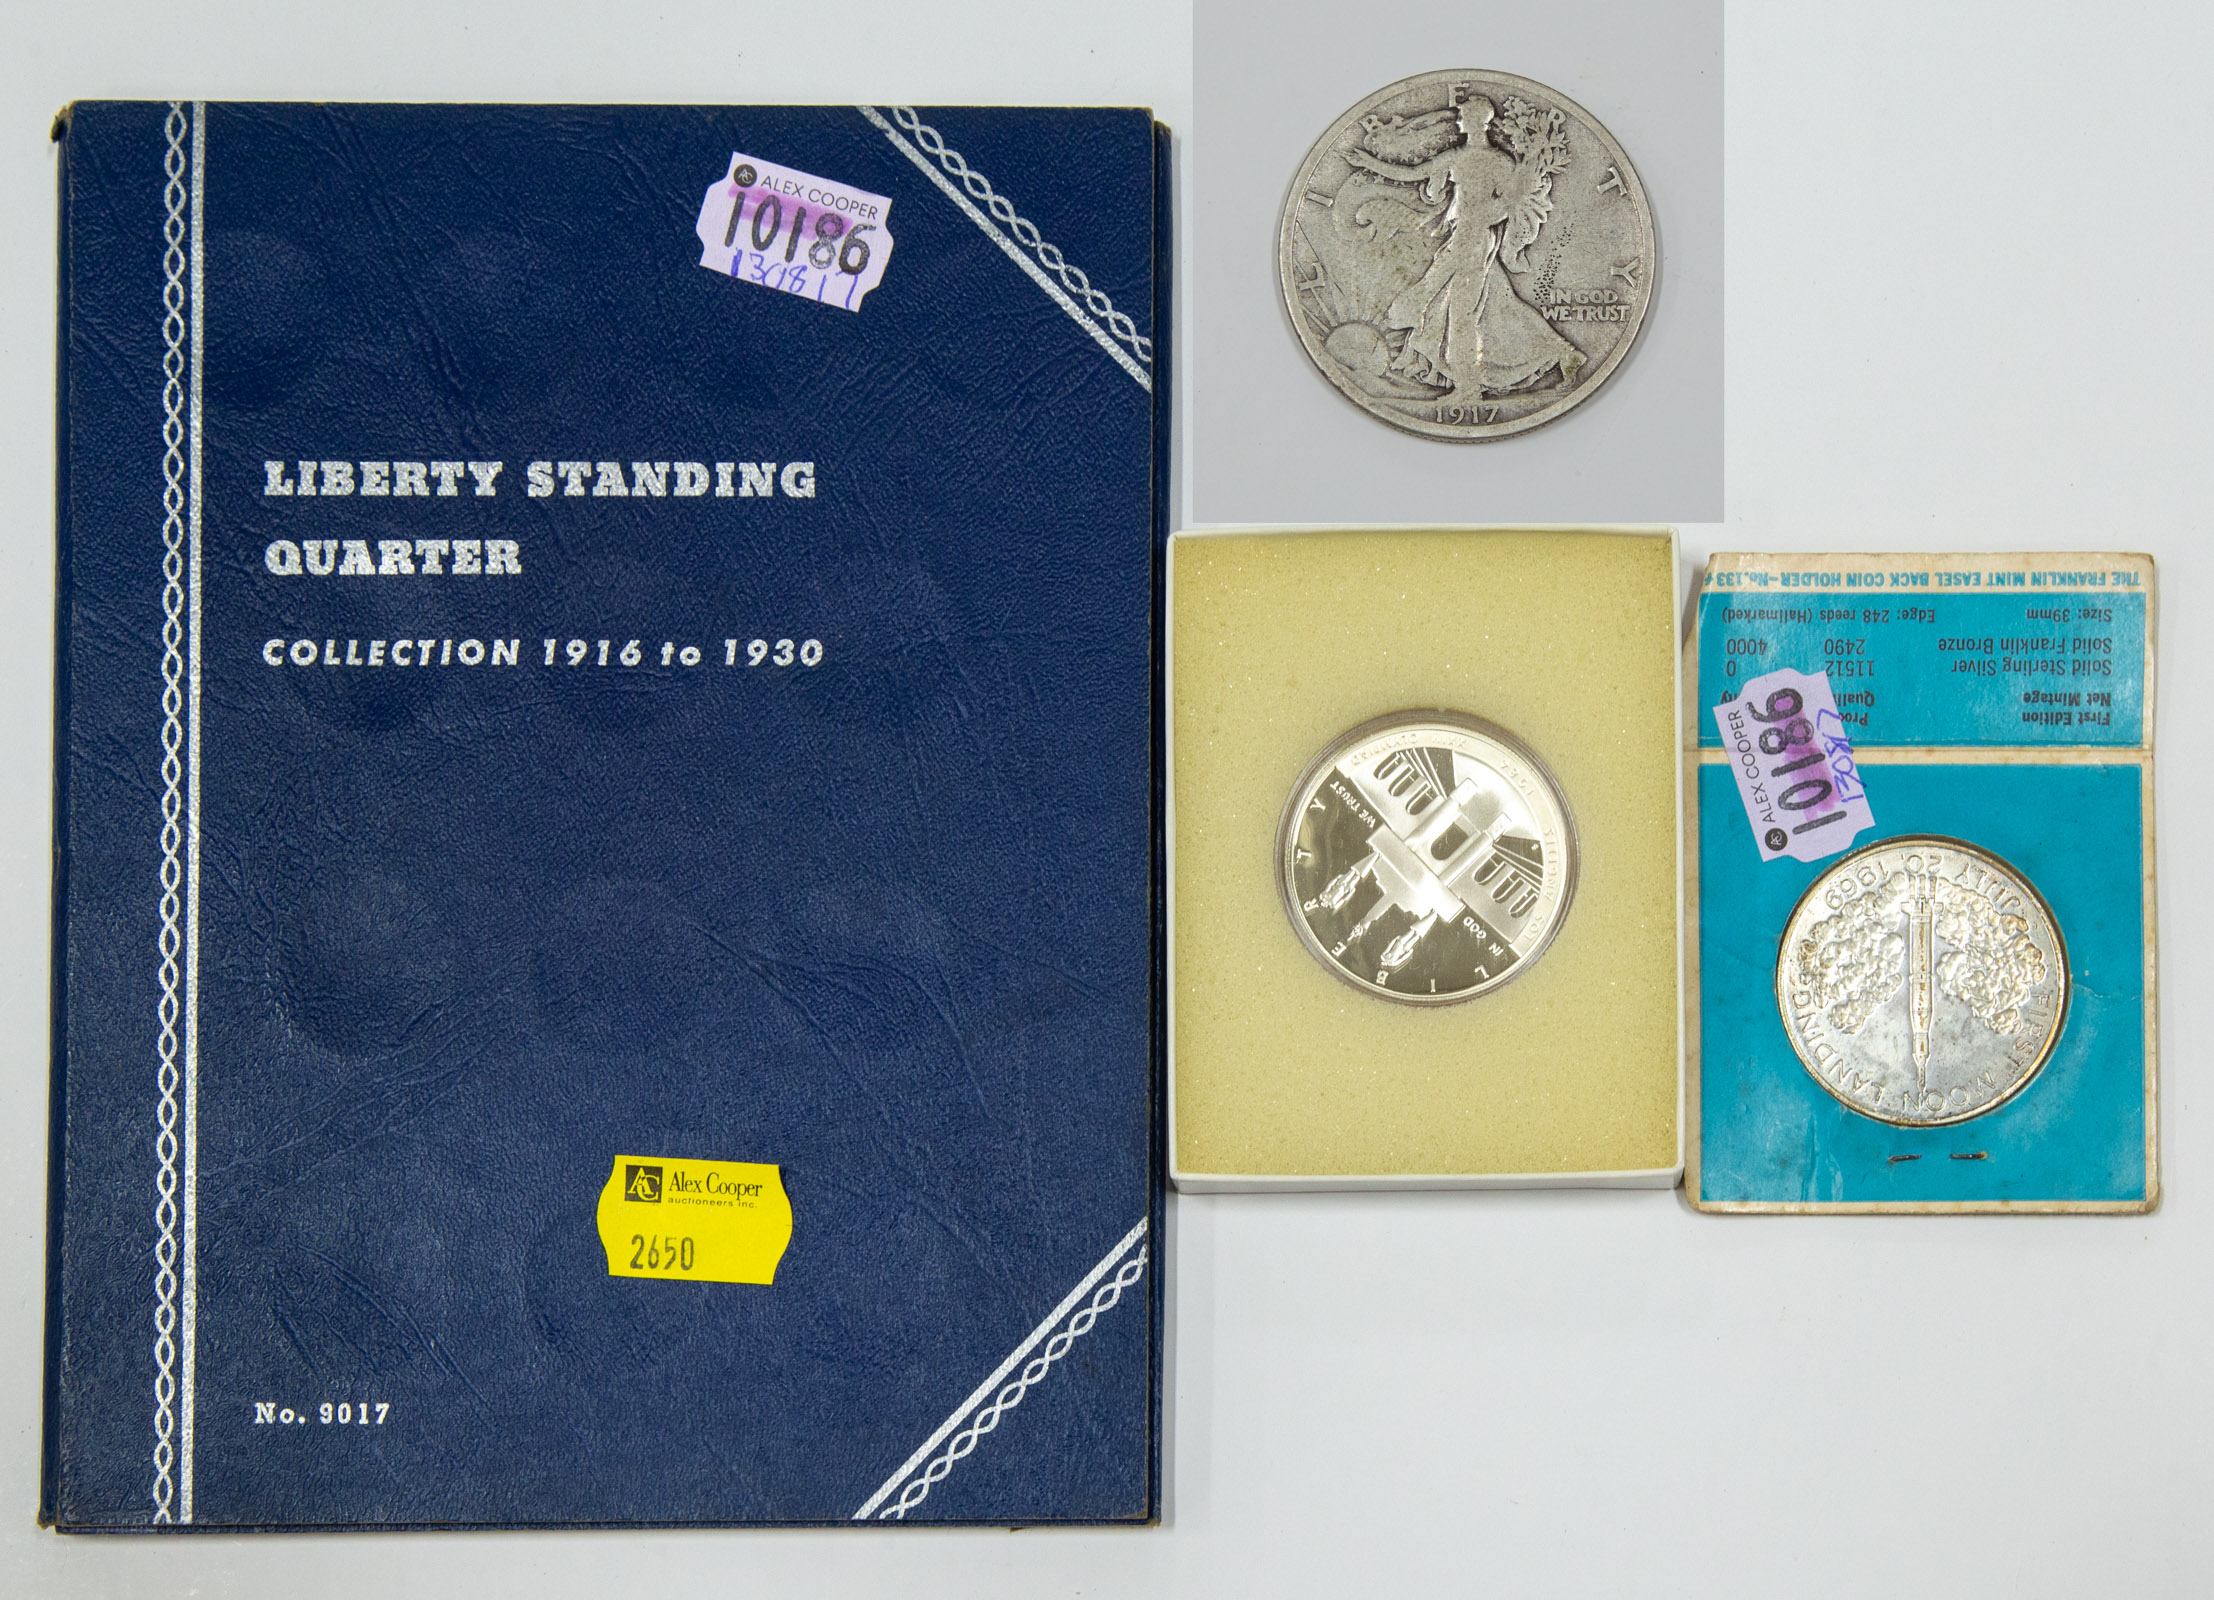 SILVER COINS & MEDALS 8 Liberty